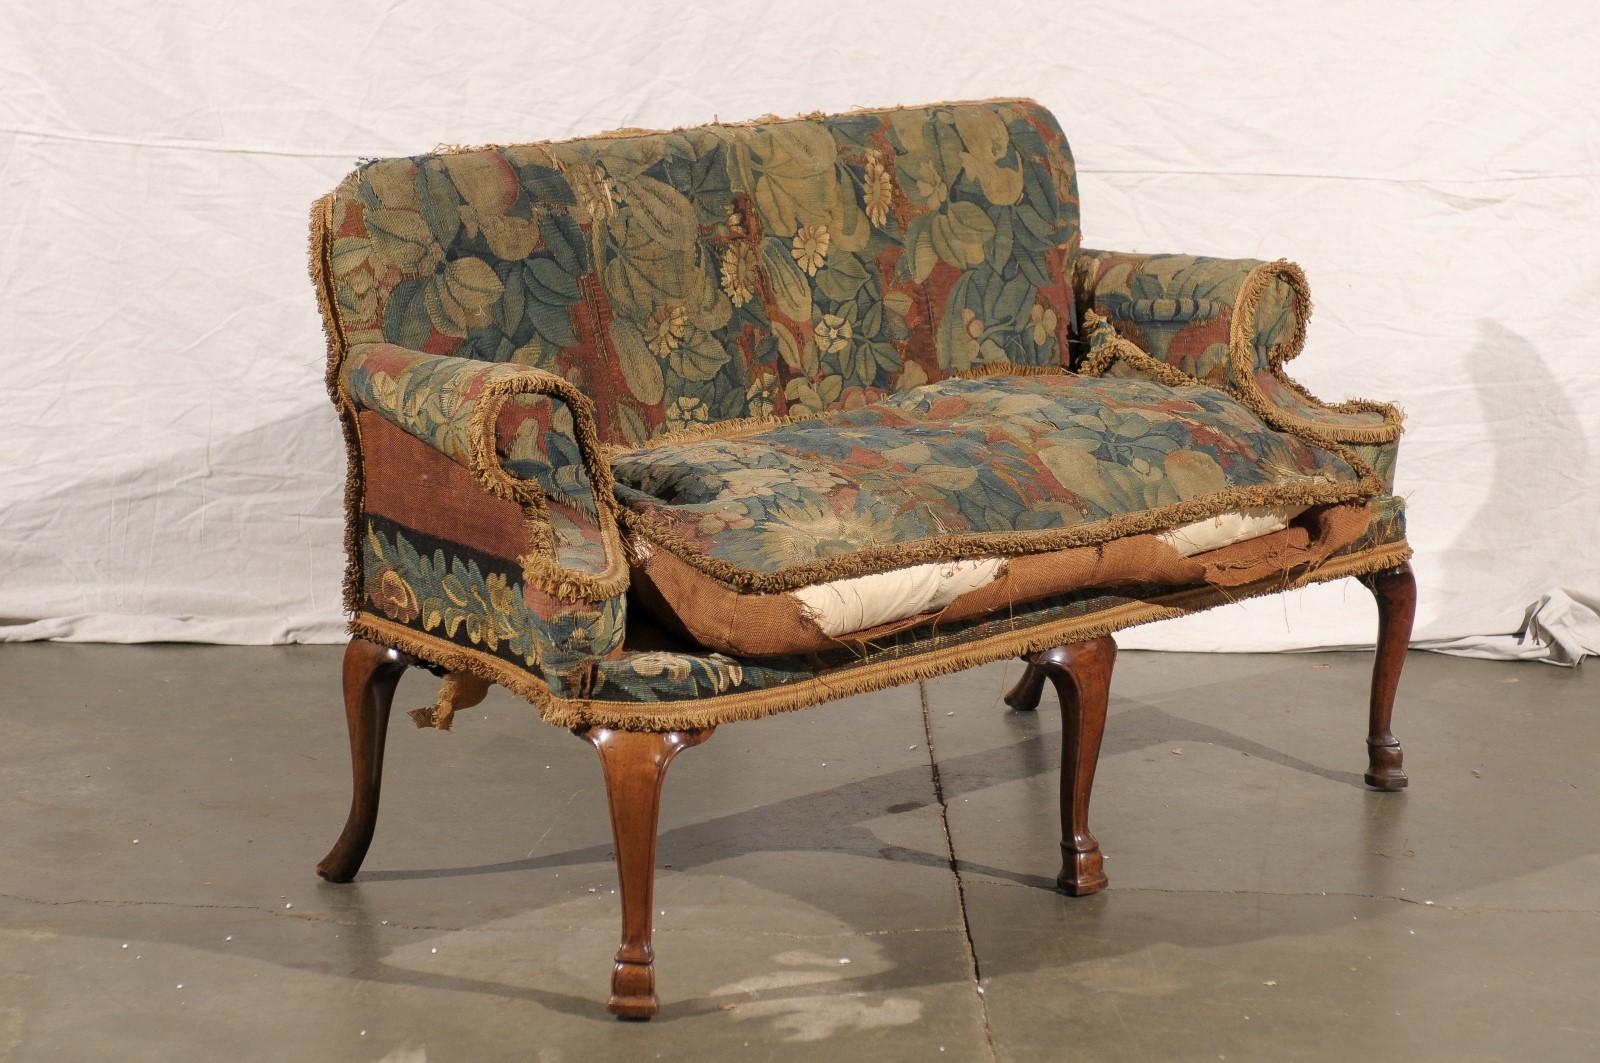 19th Century English Settee with Needlepoint Fabric 3